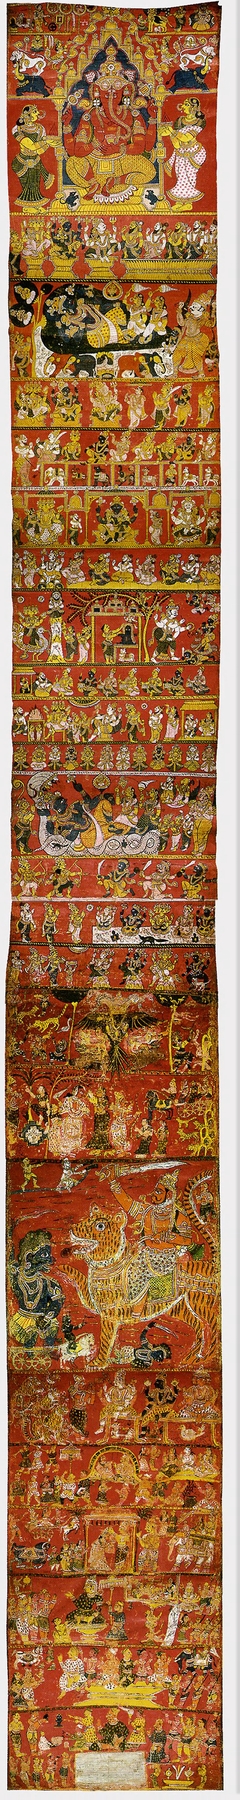 A Narrative Scroll from Andhra Pradesh by anonymous painter